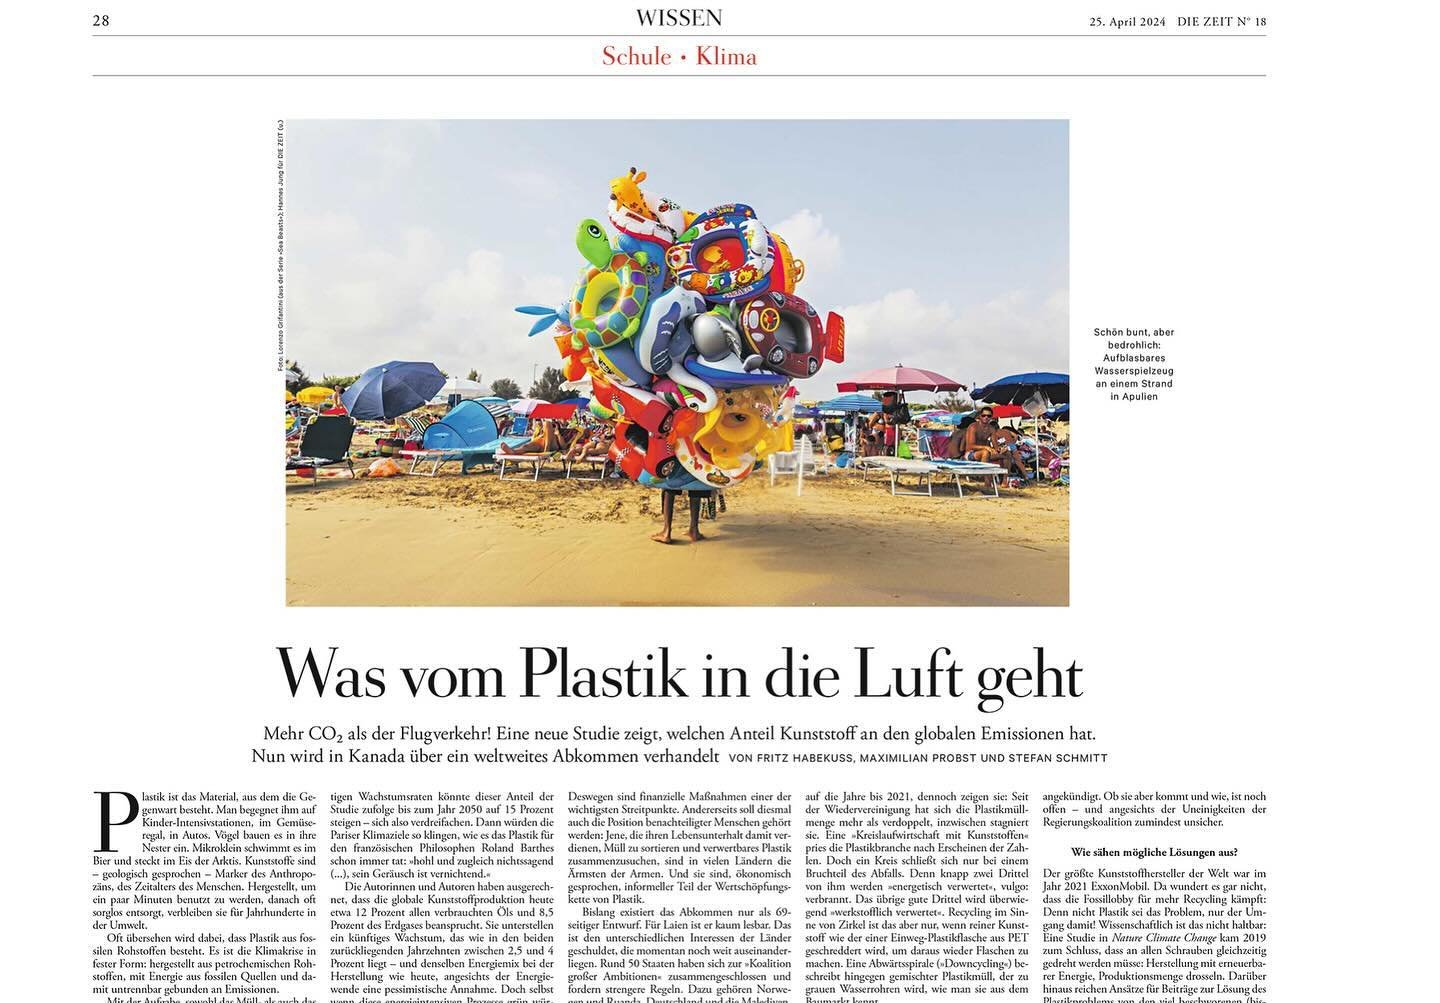 Exciting feature of my photo &lsquo;Balloons&rsquo; accompanying an article on plastic in today&rsquo;s Die Zeit issue!
@die_zeit_  #seabeasts #luftmuseum #italy #puglia #summer #salento  #streetphotography  #lensculture #magnumphotos #aspfeatures  #